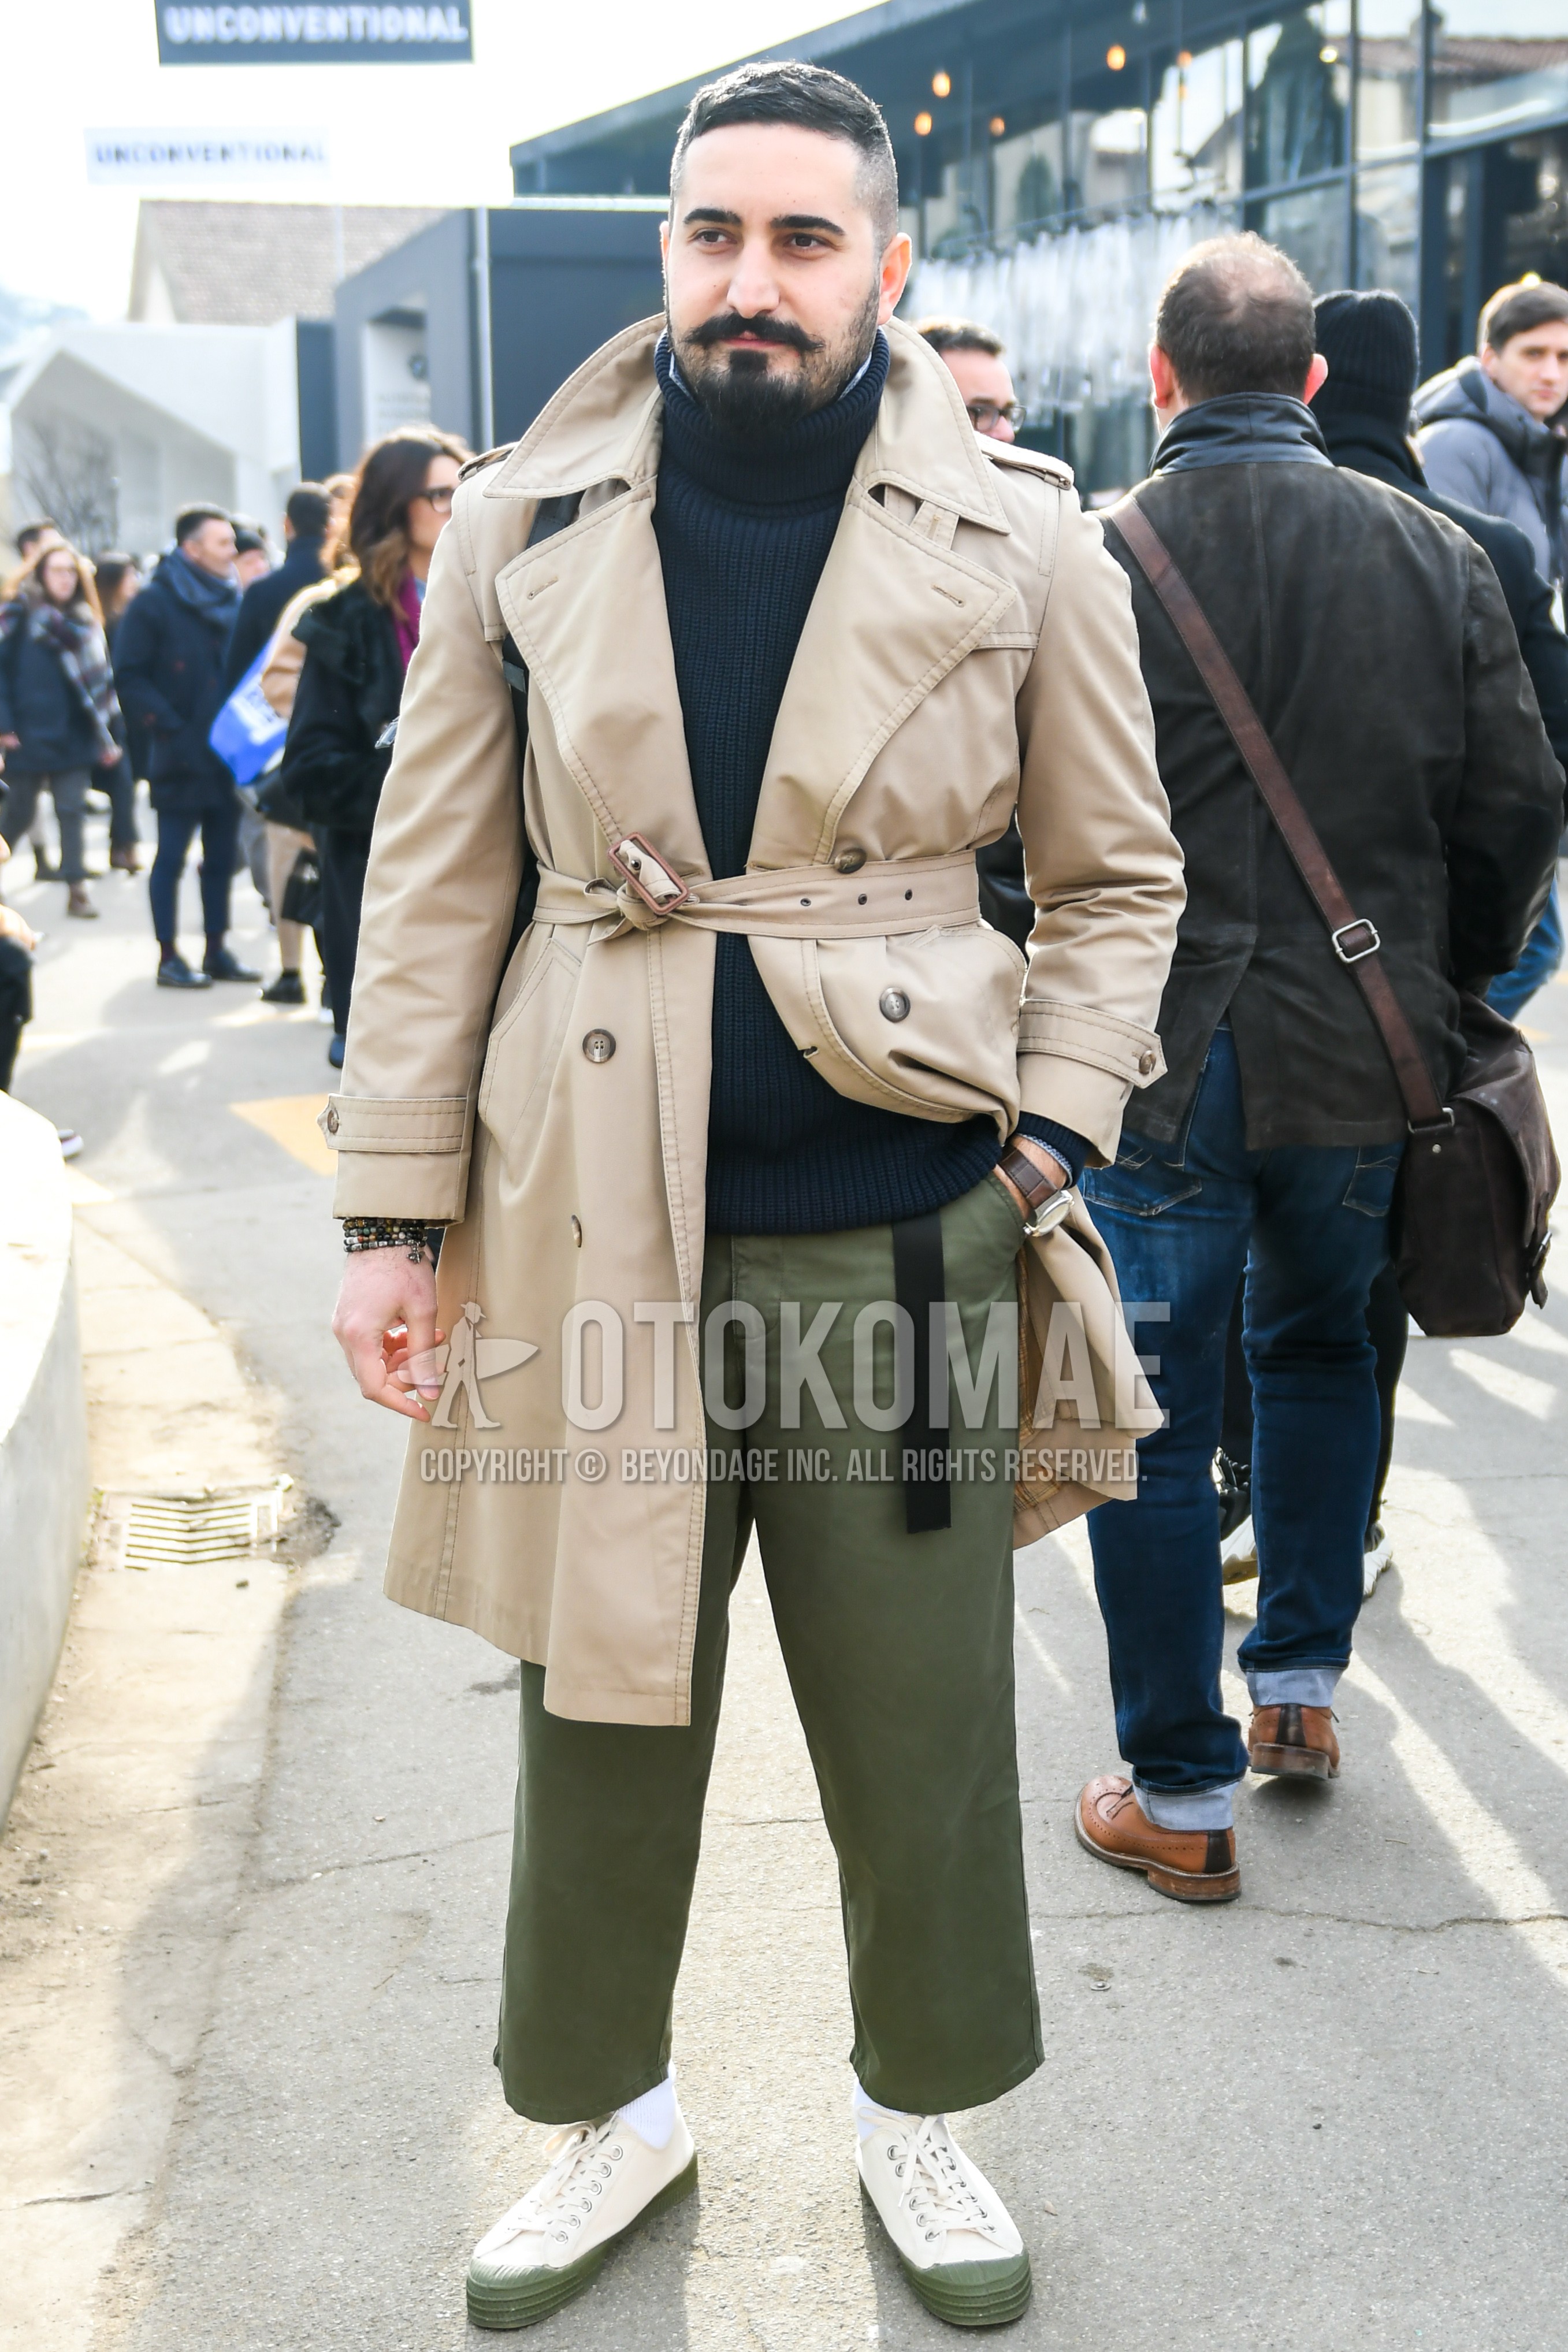 Men's winter outfit with beige plain trench coat, navy plain turtleneck knit, olive green plain chinos, white plain socks, white olive green low-cut sneakers.